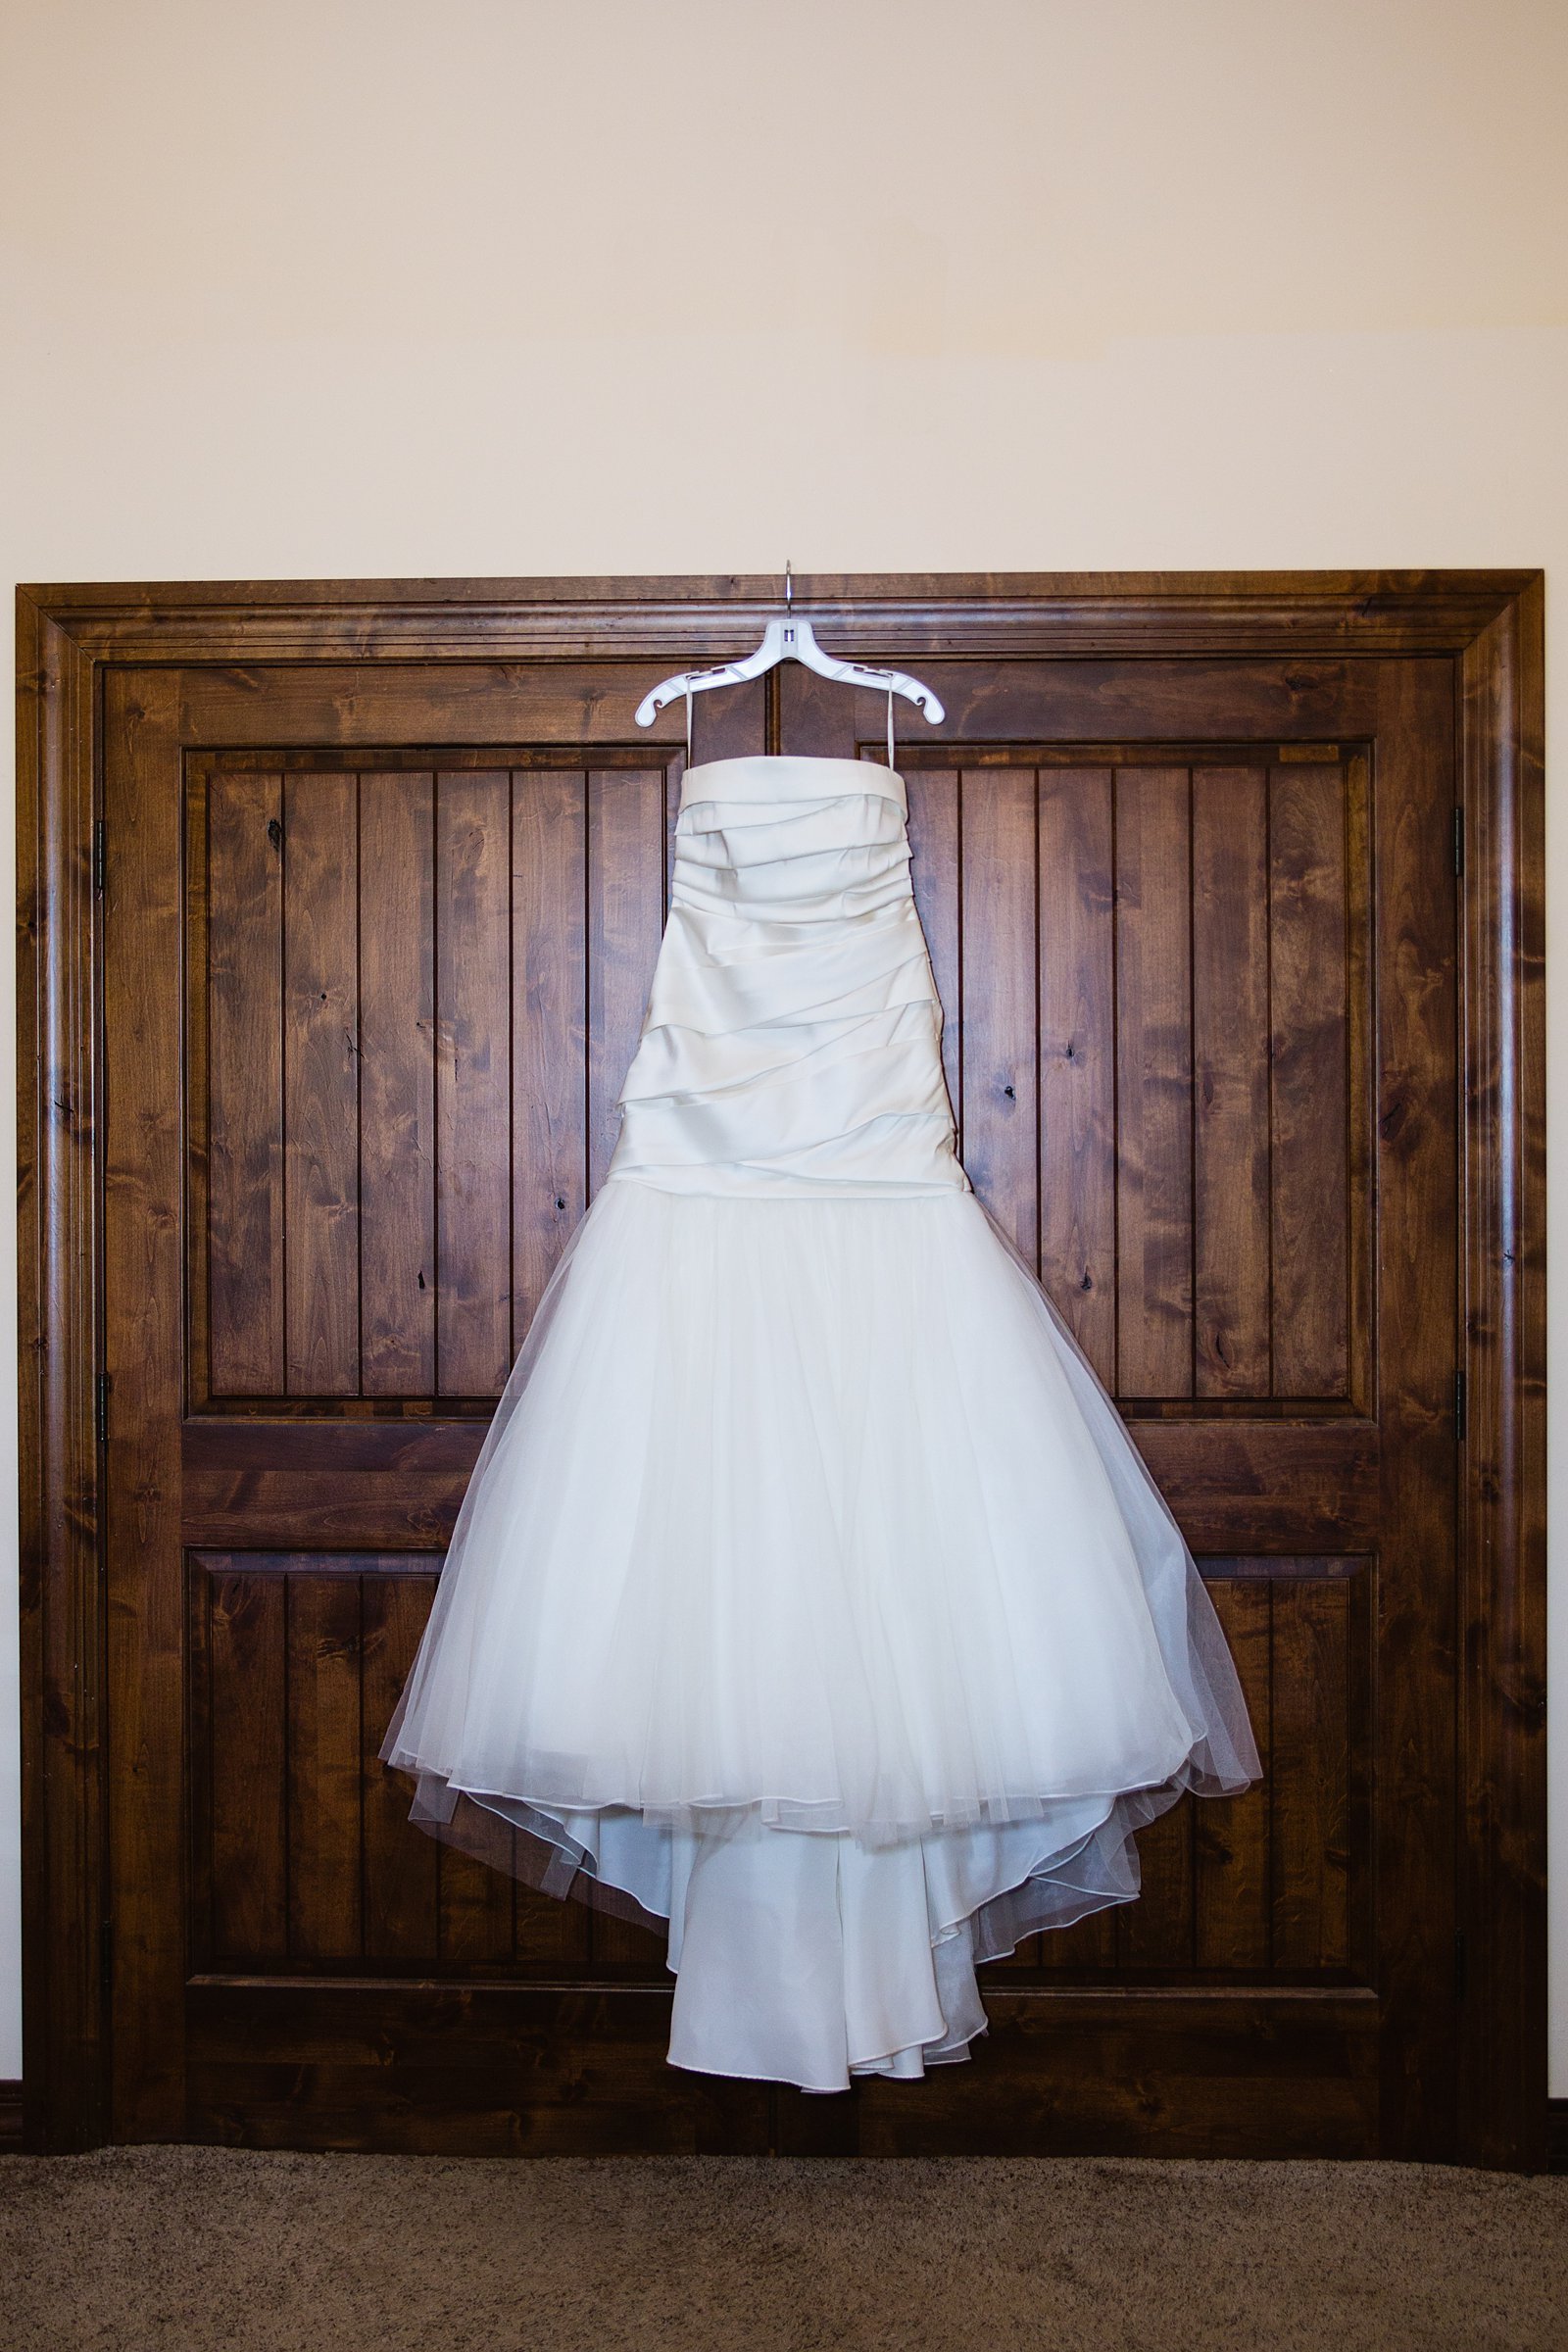 Brides simple classic wedding dress hanging from a door by PMA Photography.